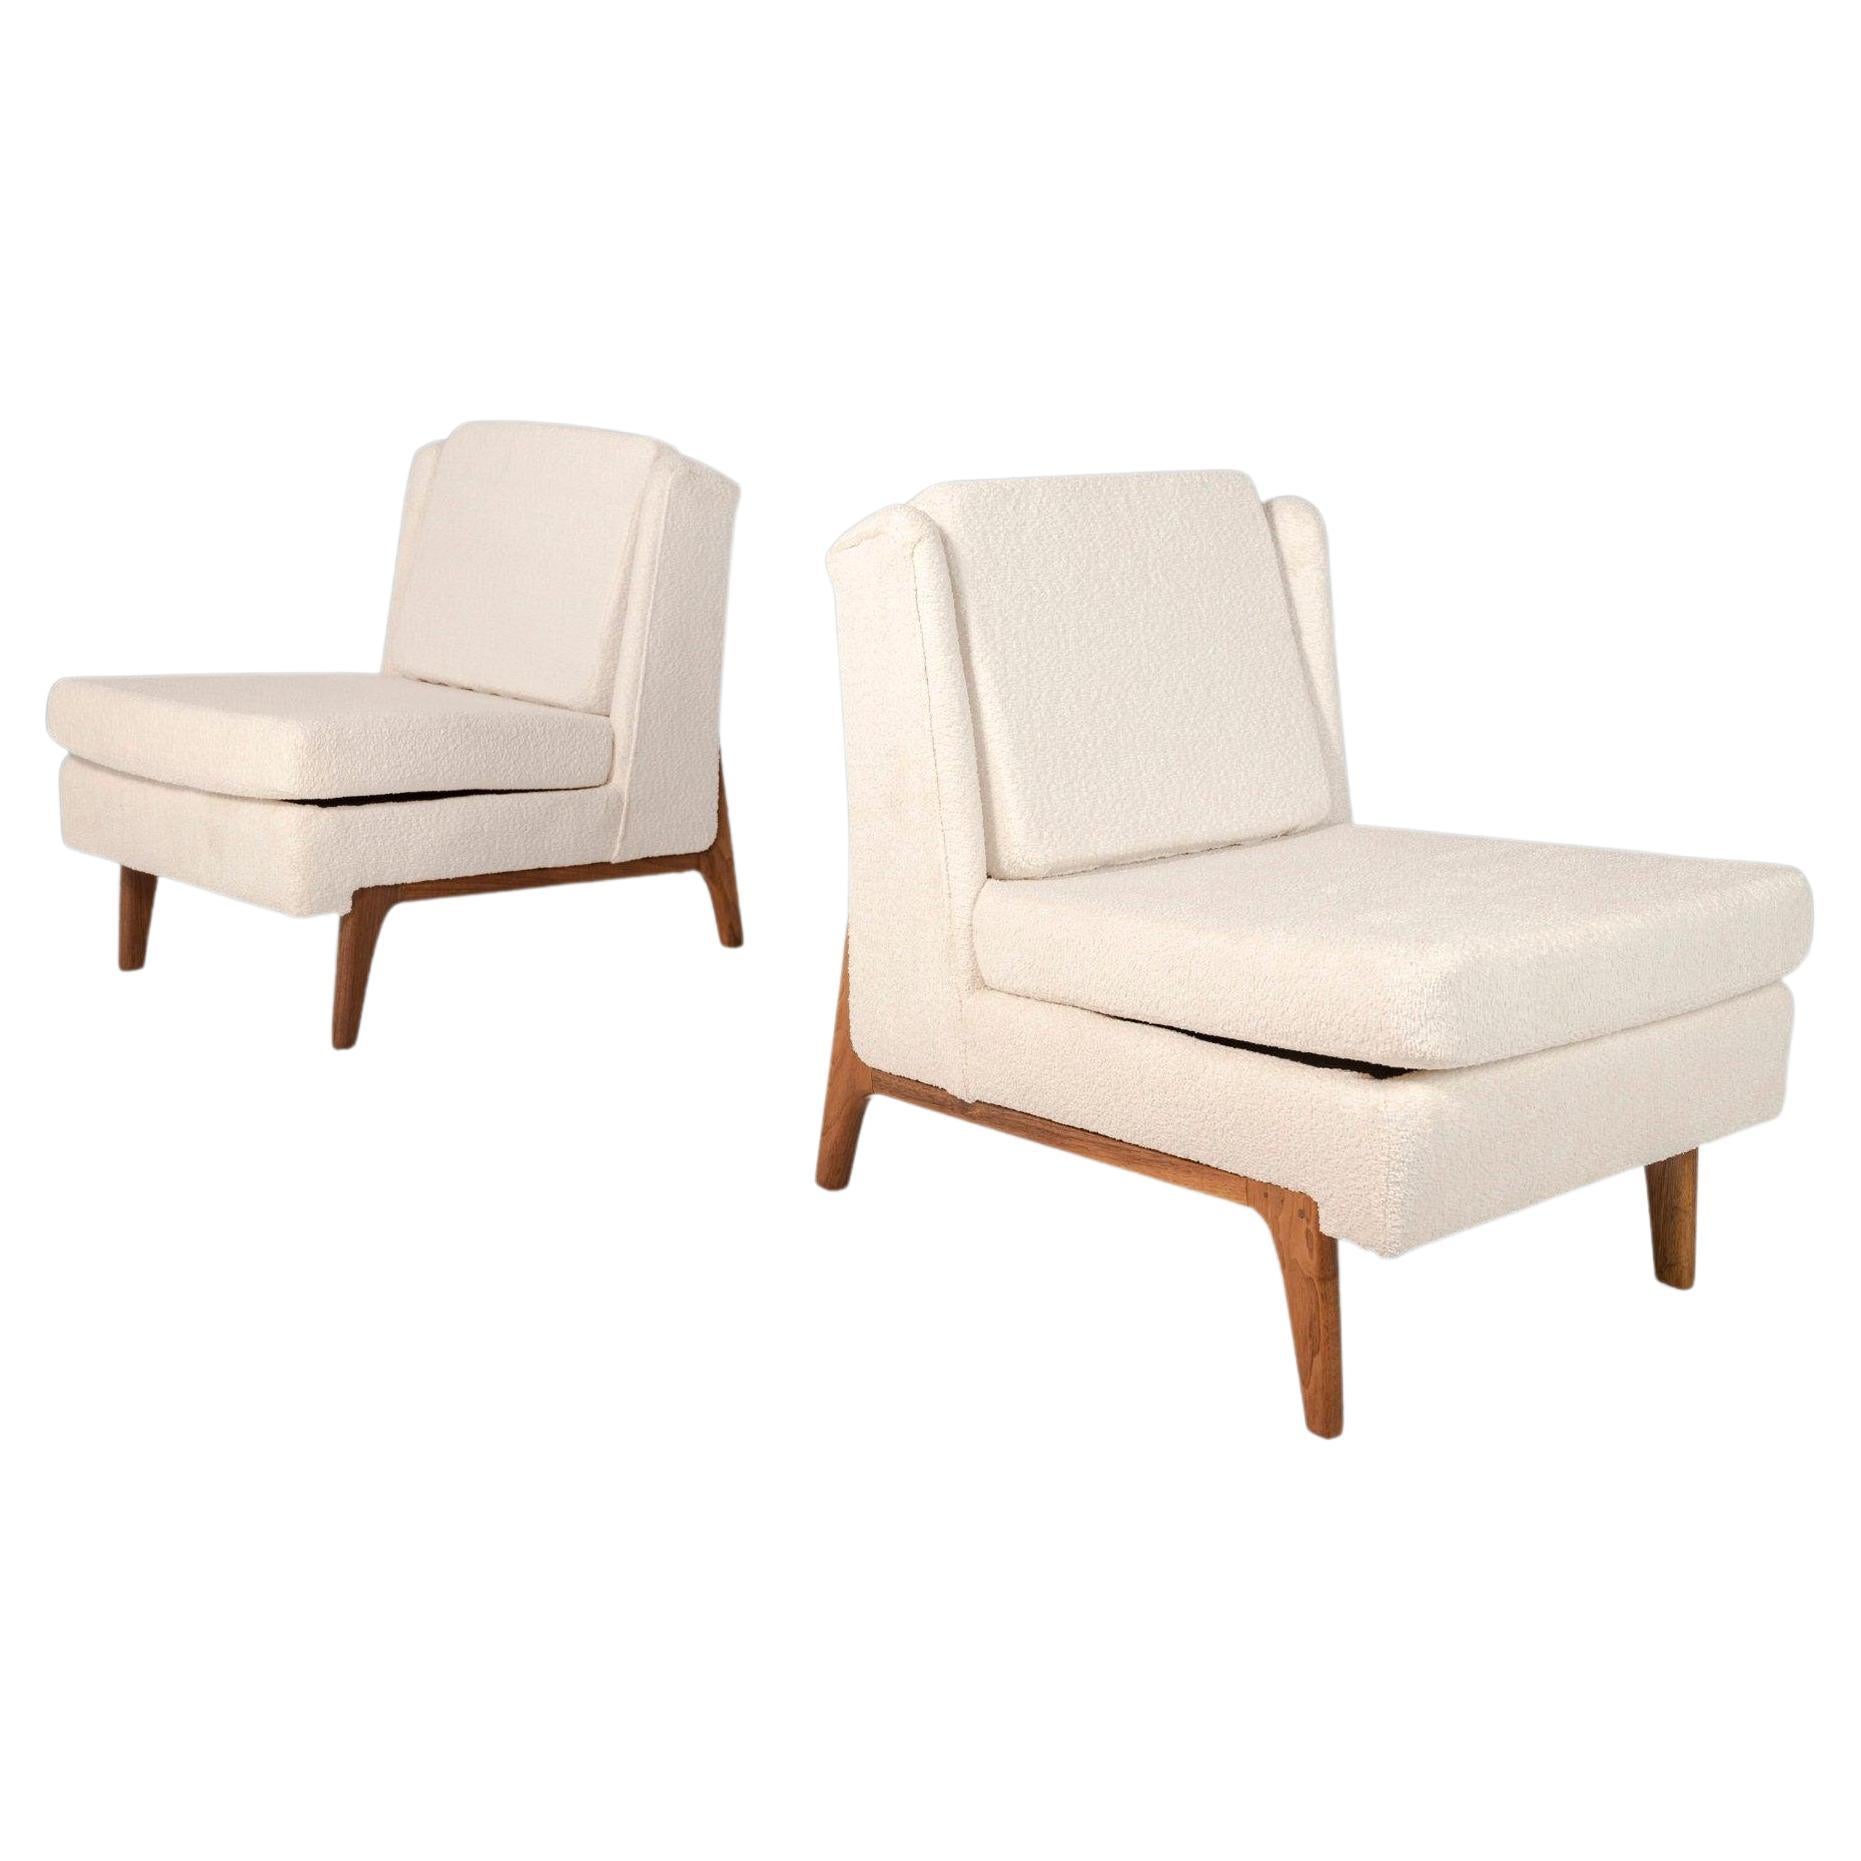 Set of Two '2' Slipper Chairs After Edward Wormley in New Boucle, USA, c. 1960's For Sale